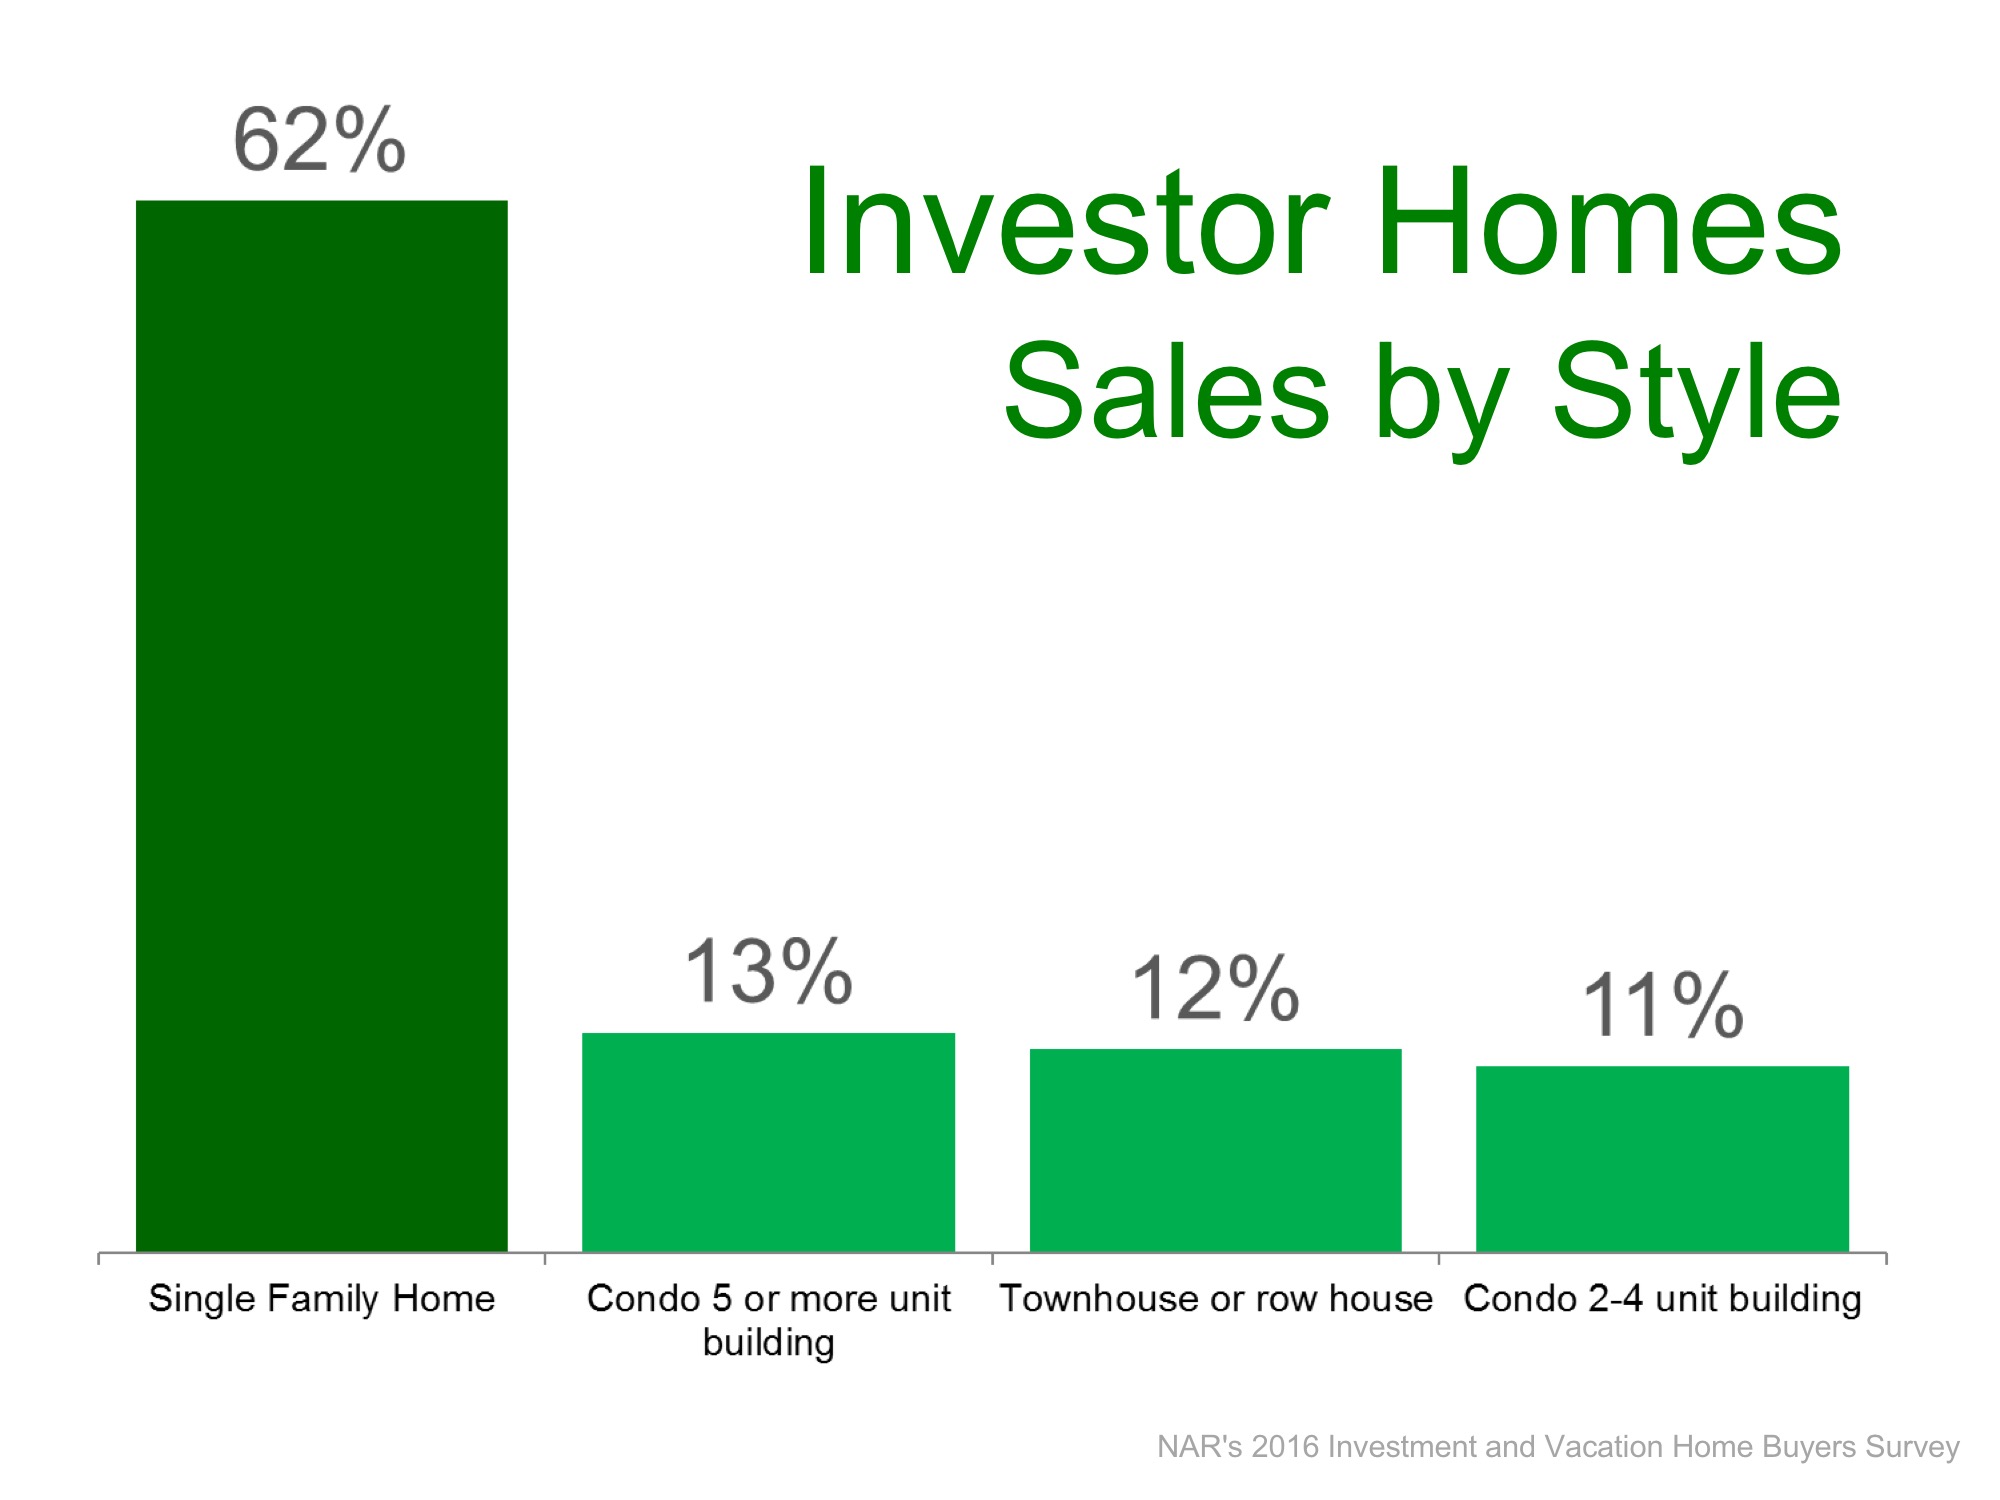 type of property investors bought